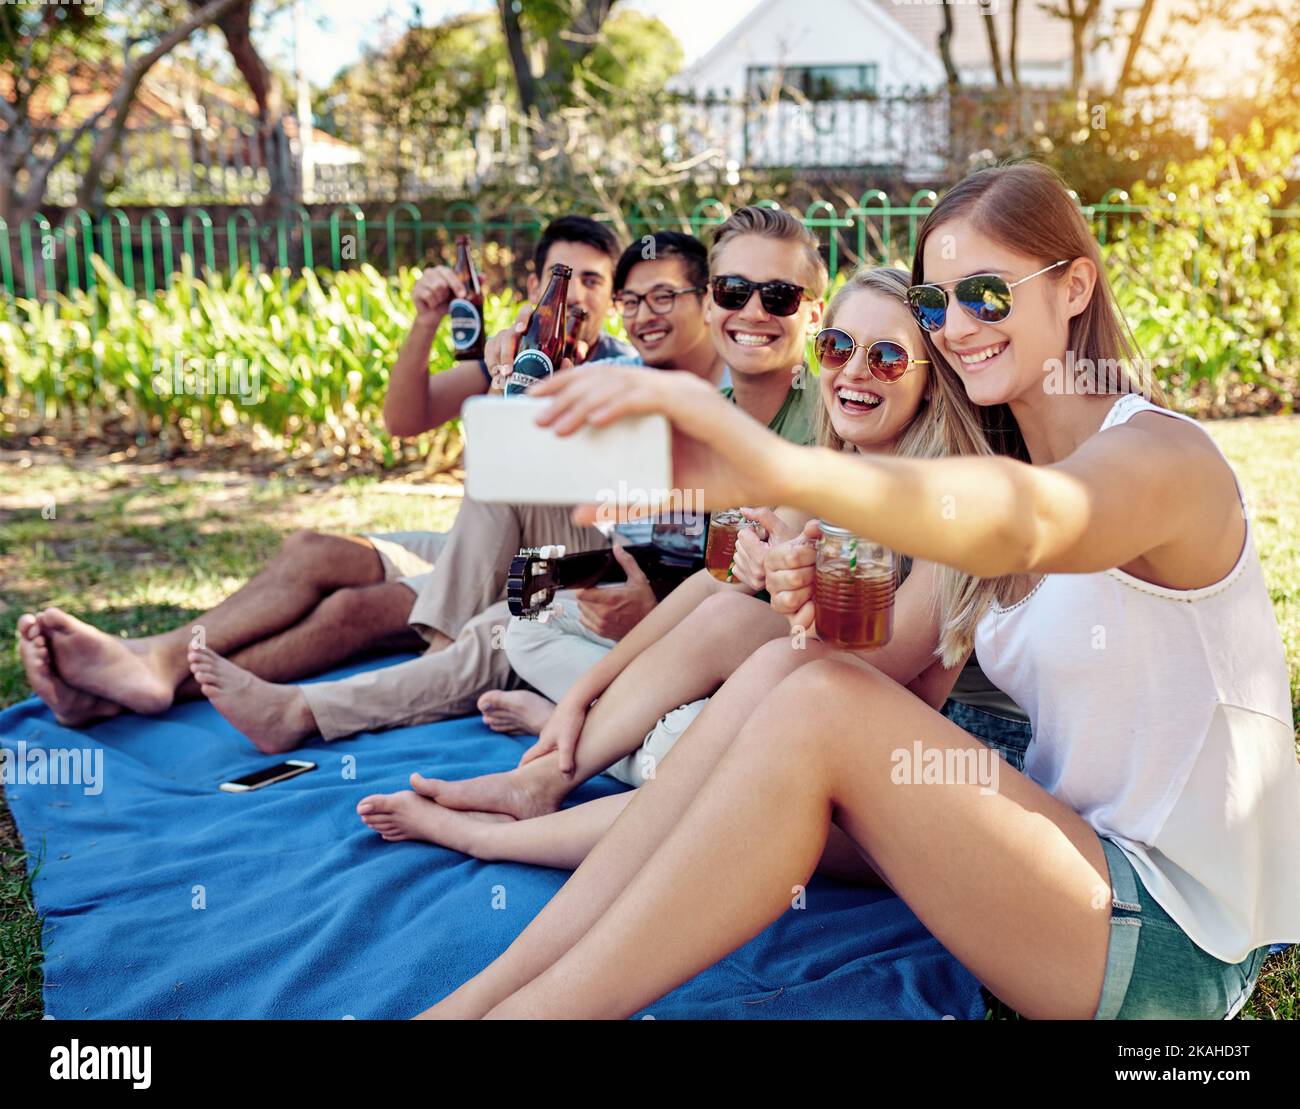 Lemme get one with all of us. a young group of friends taking selfies while enjoying a few drinks outside in the summer sun. Stock Photo